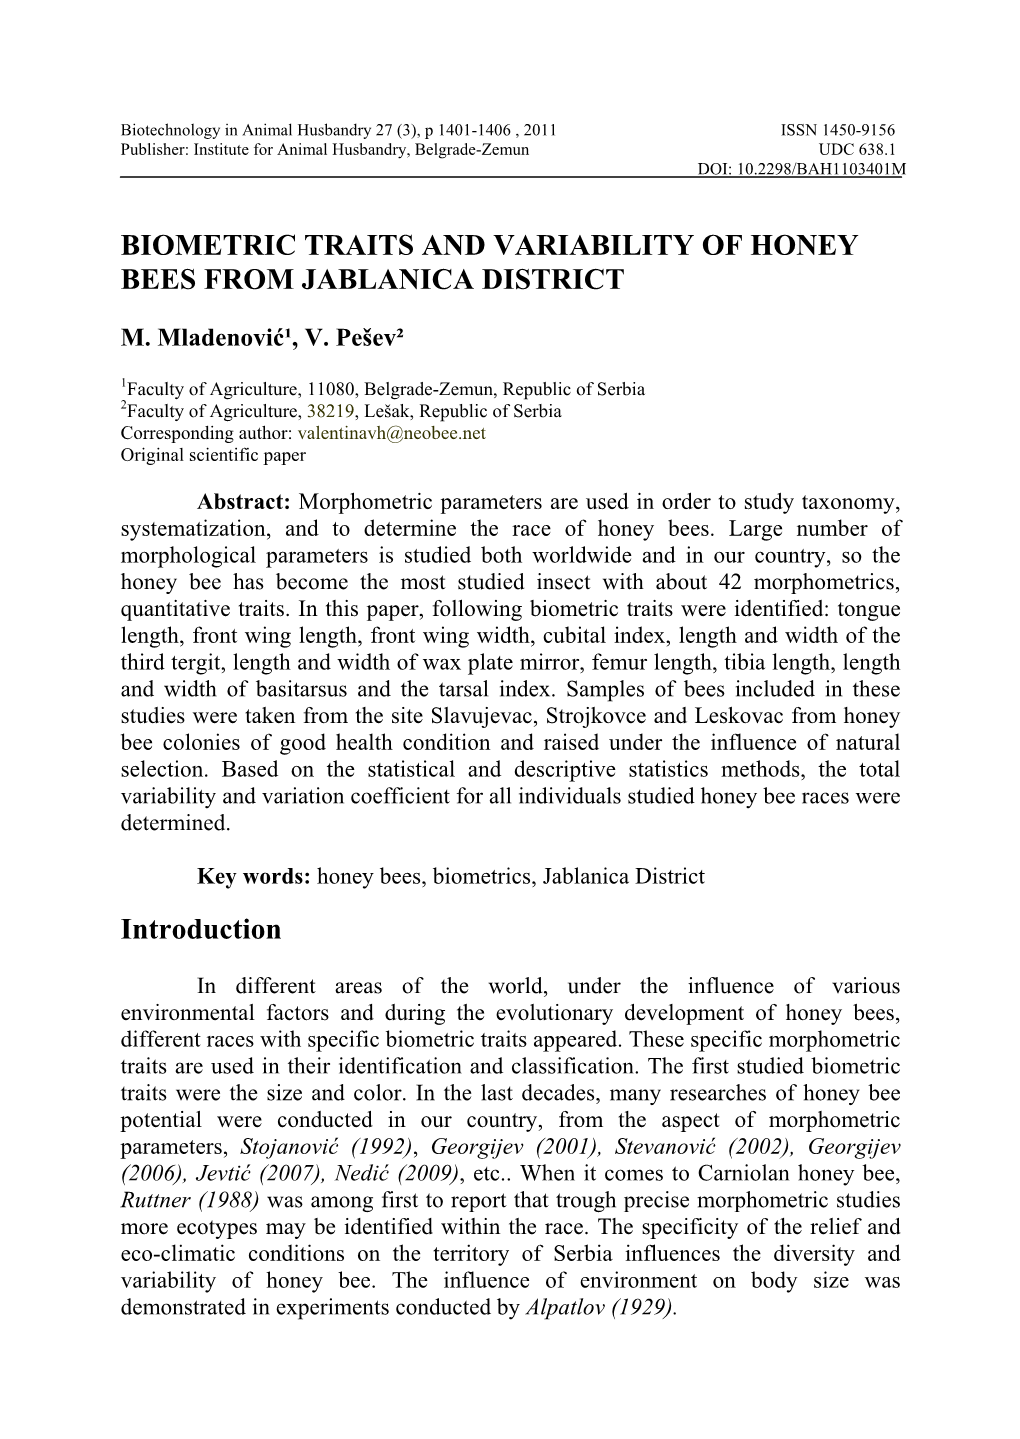 Biometric Traits and Variability of Honey Bees from Jablanica District